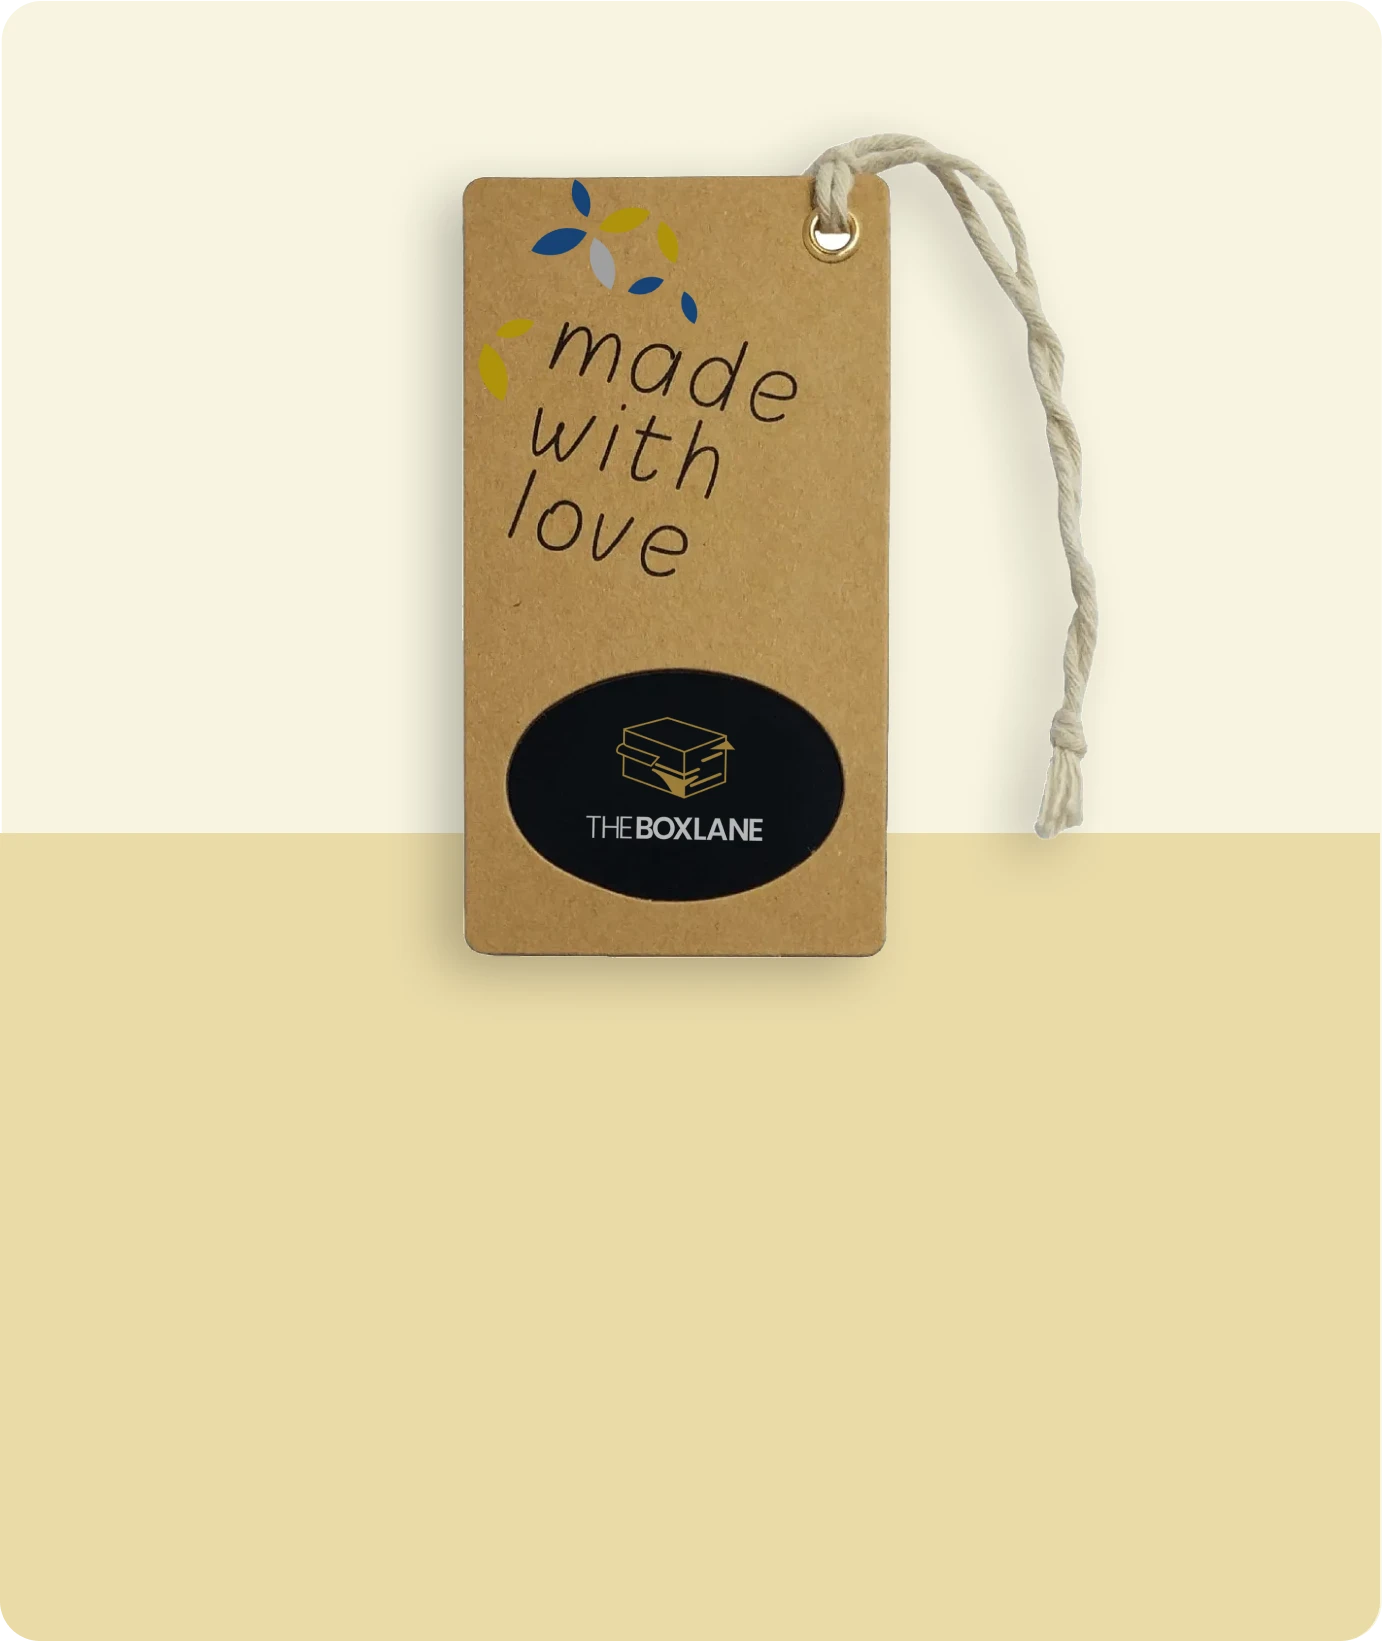 Custom Tags related products image | The Box Lane